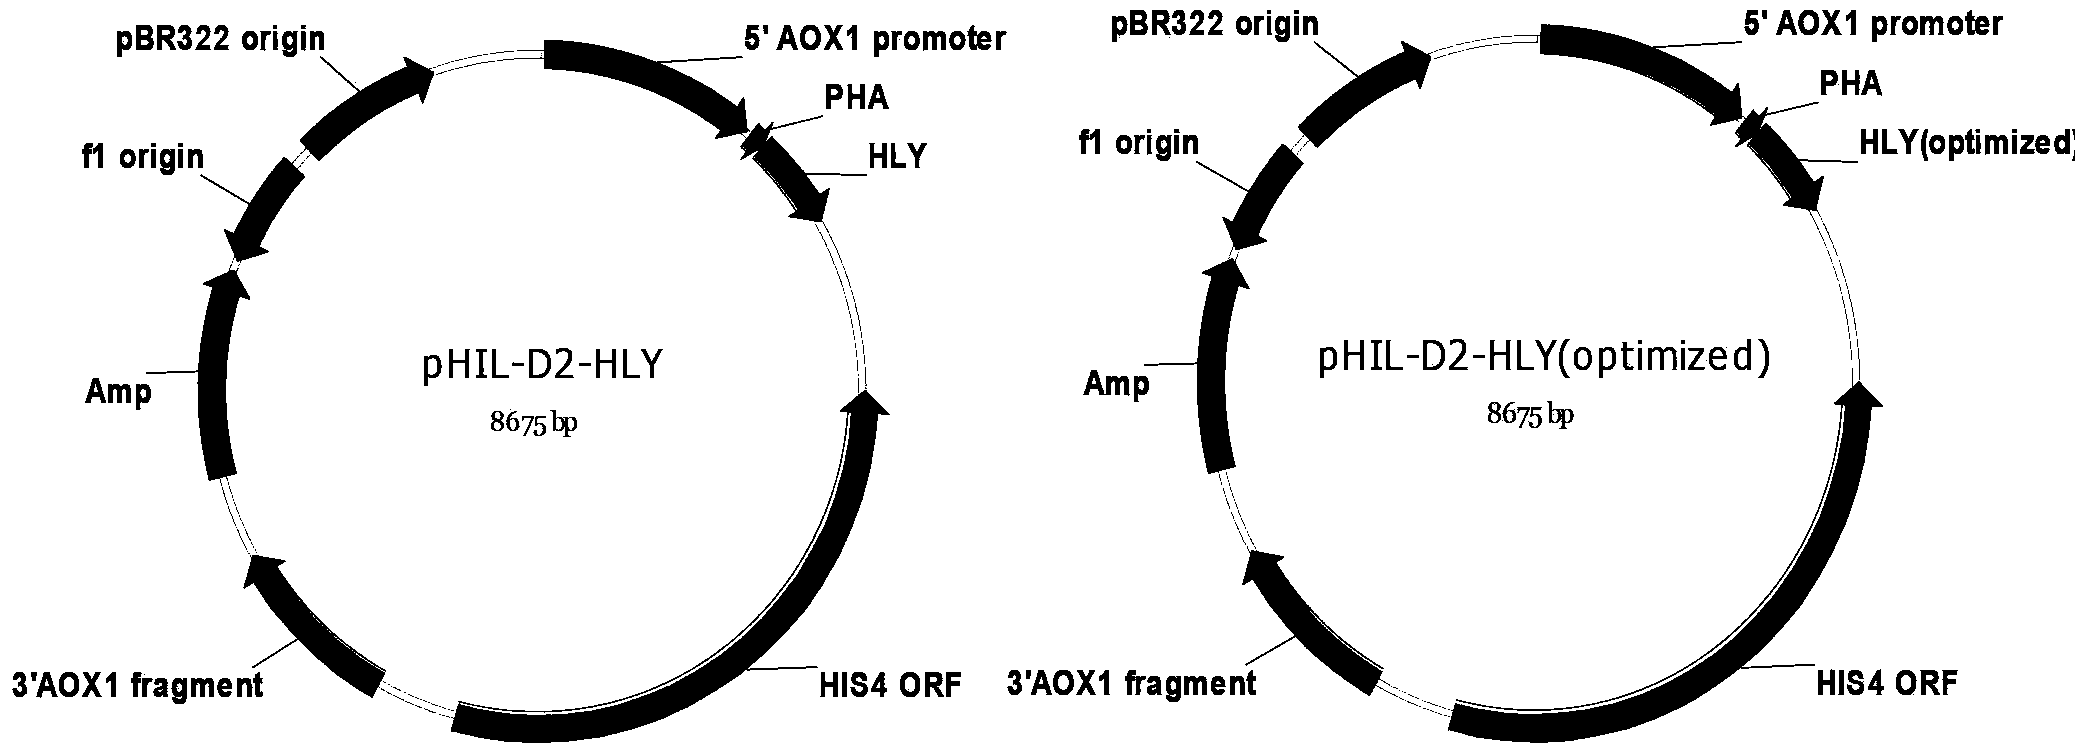 Recombinant expression method of human lysozyme